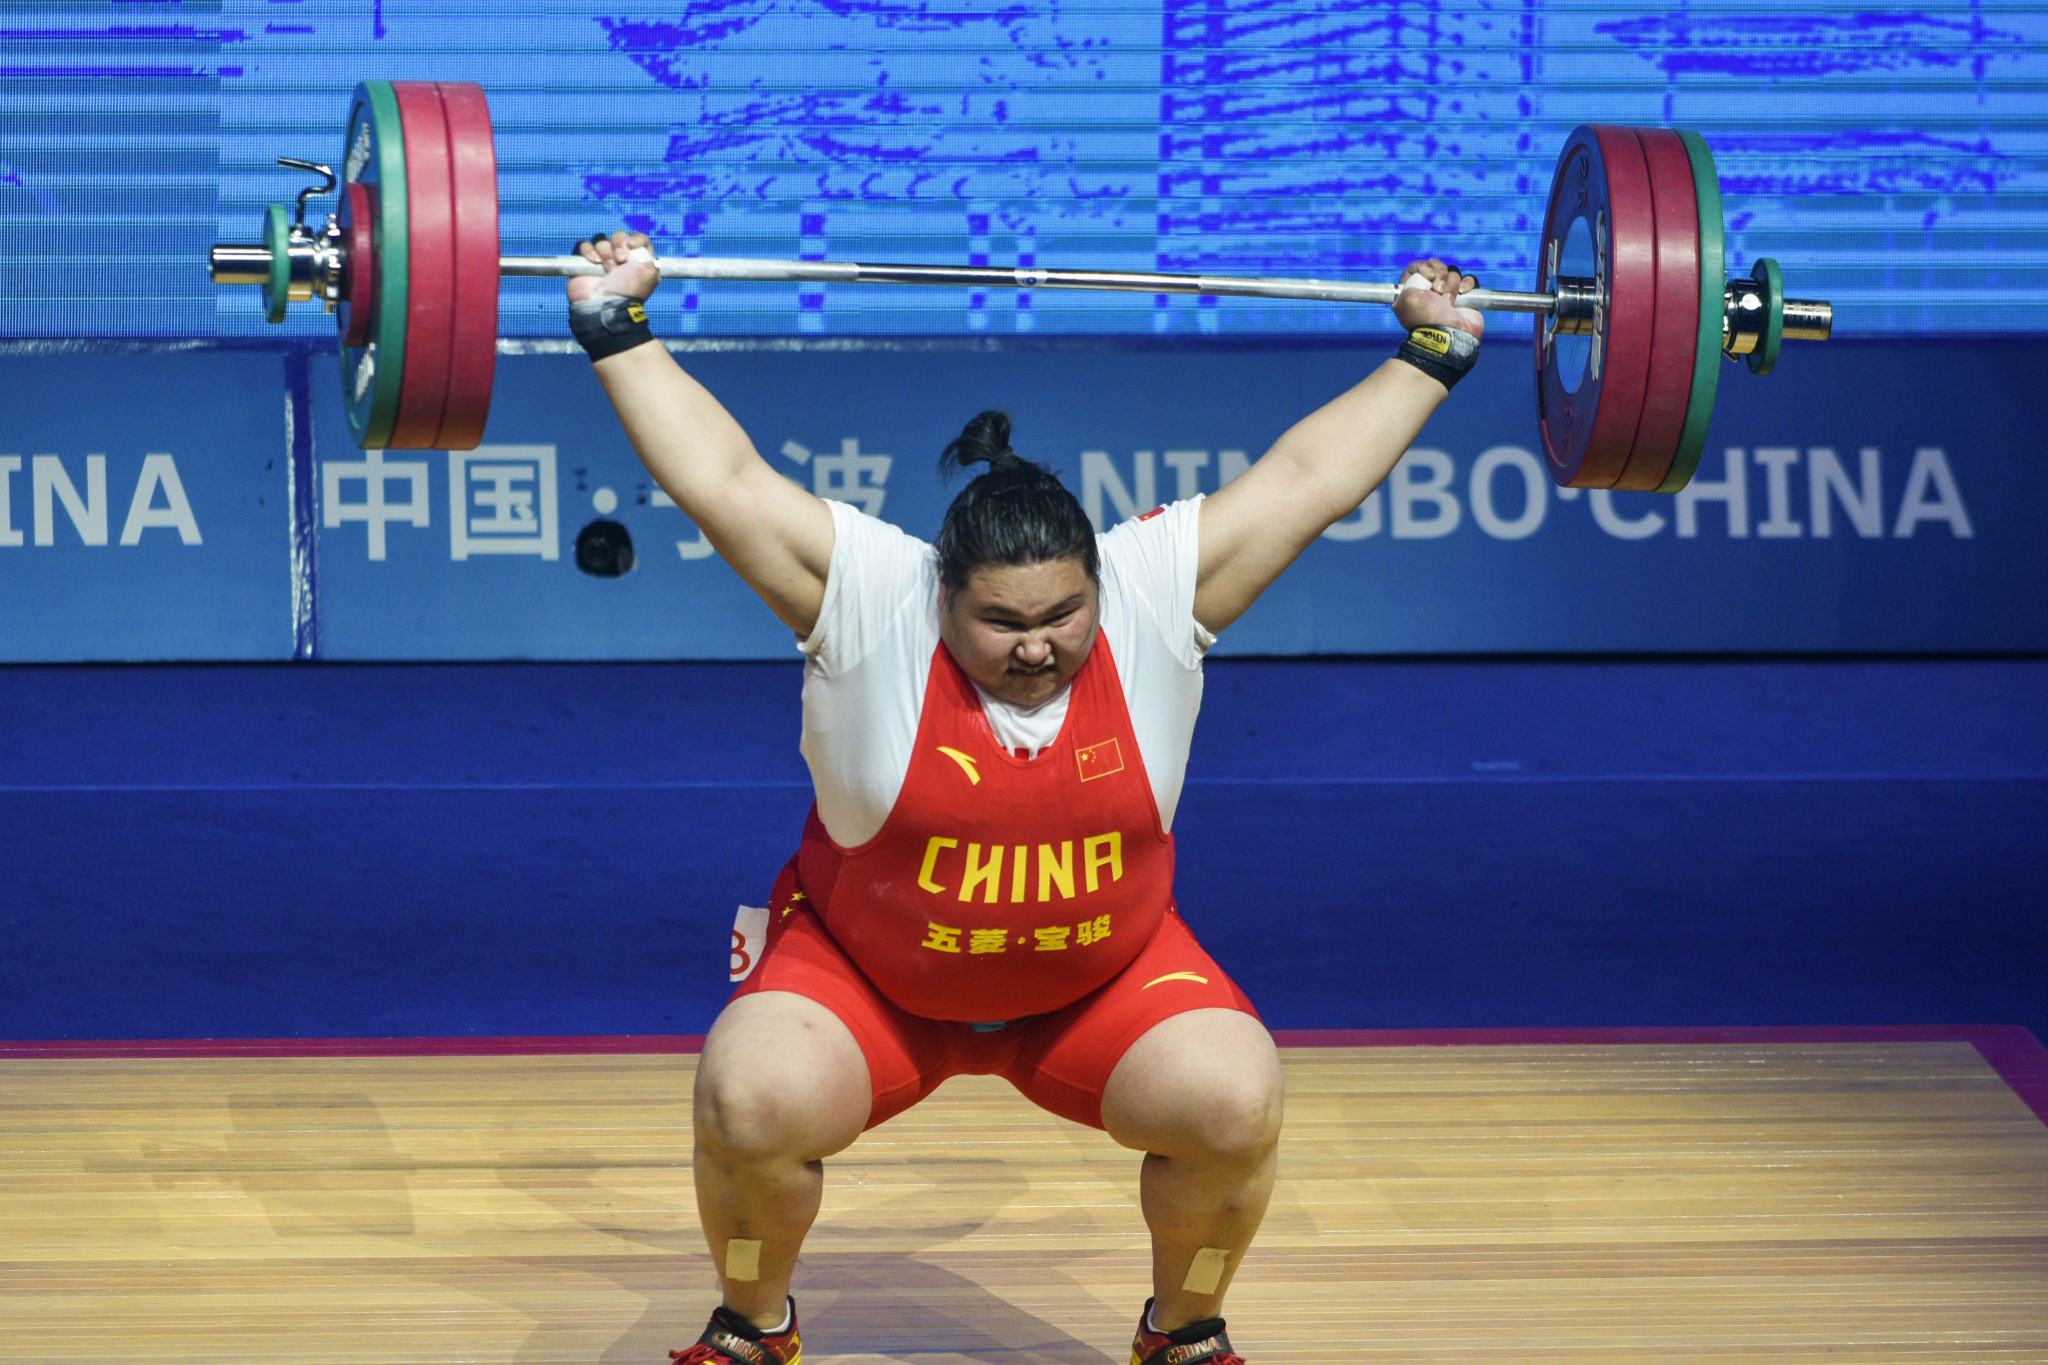 Li Wenwen of China broke the snatch world record as she beat Olympic champion and compatriot Meng Suping to claim three gold medals ©Getty Images